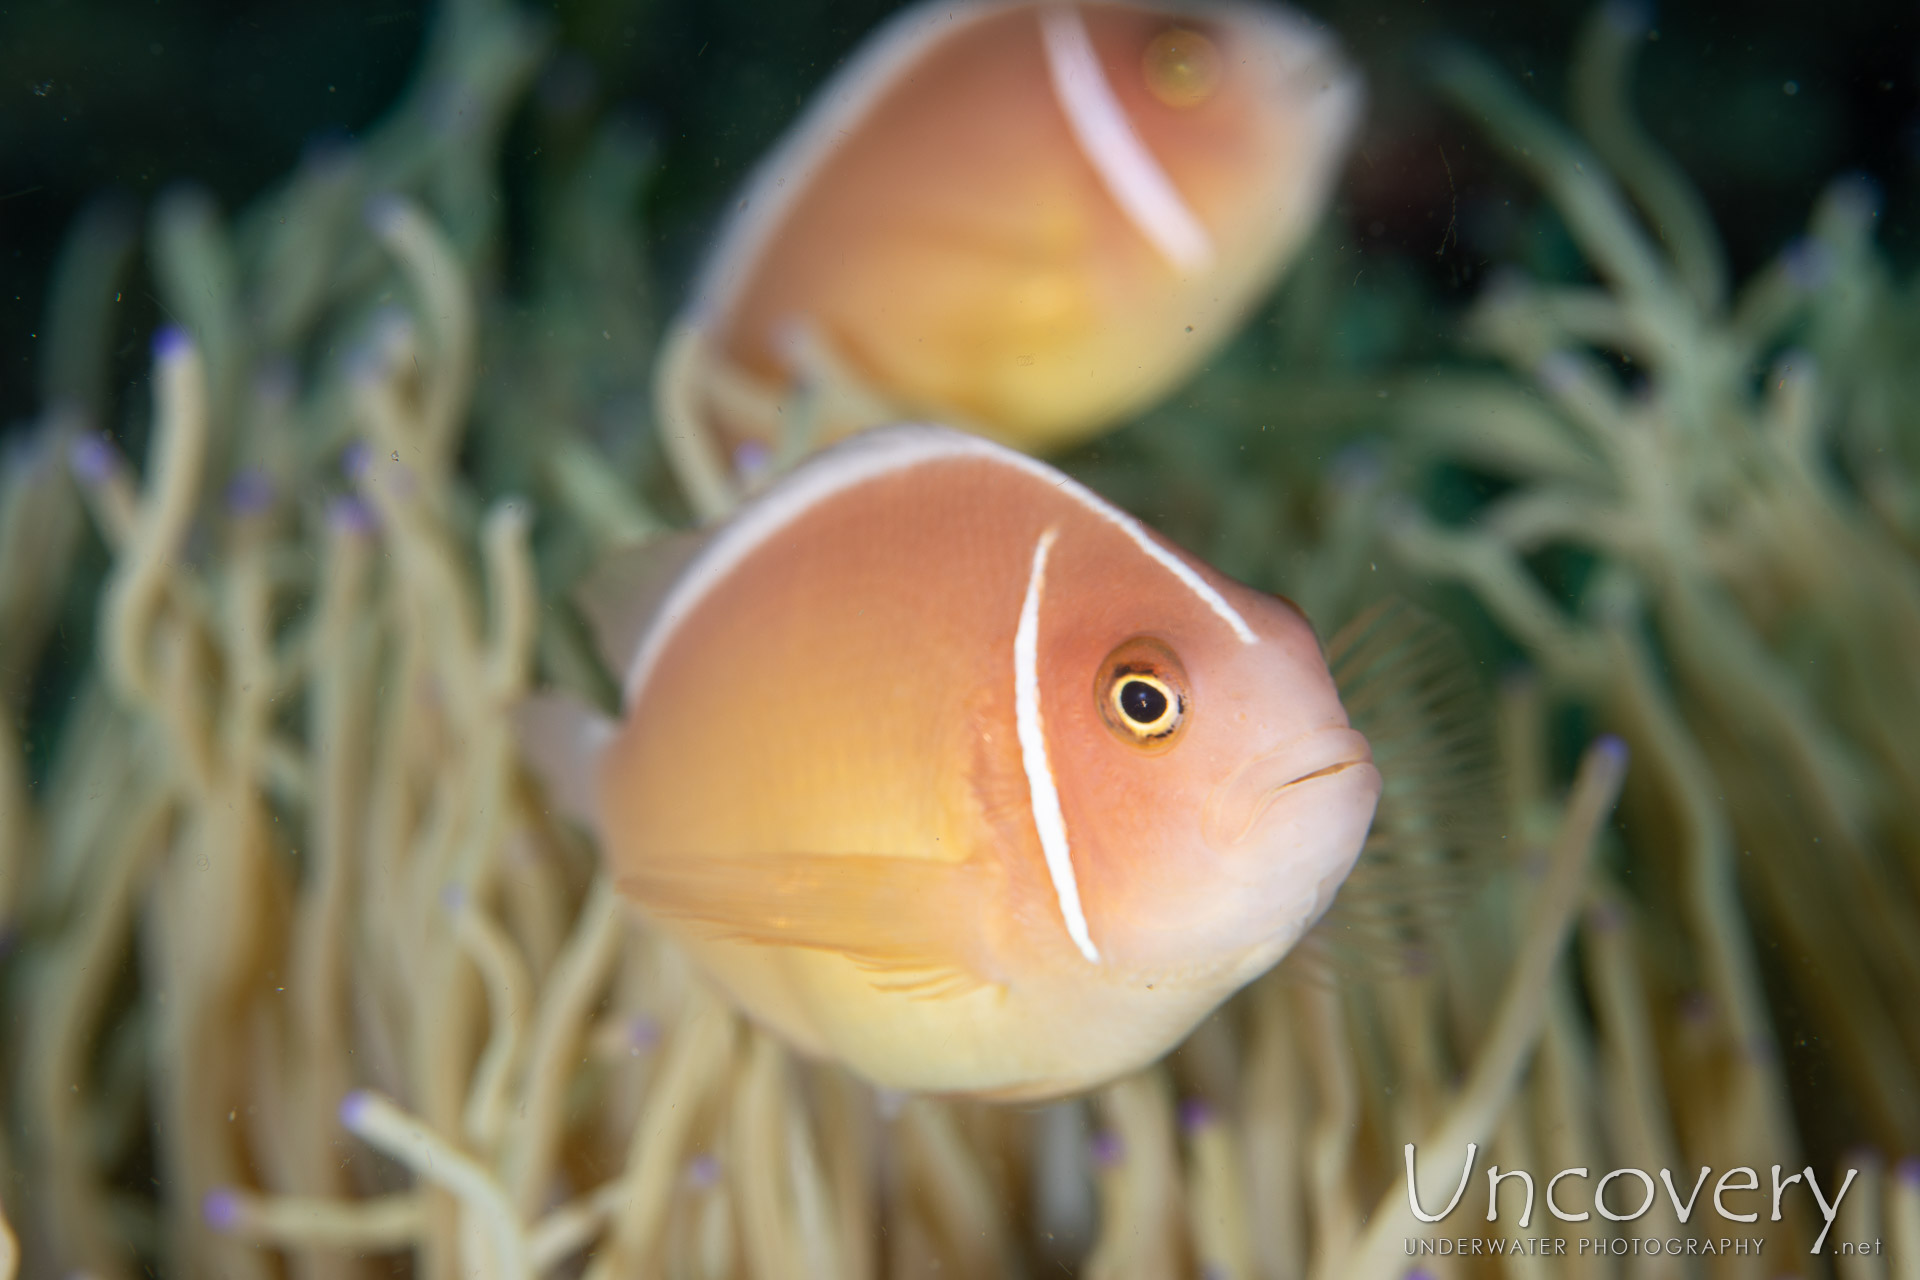 Pink Anemonefish (amphiprion Perideraion), photo taken in Philippines, Negros Oriental, Dauin, Atmosphere House Reef